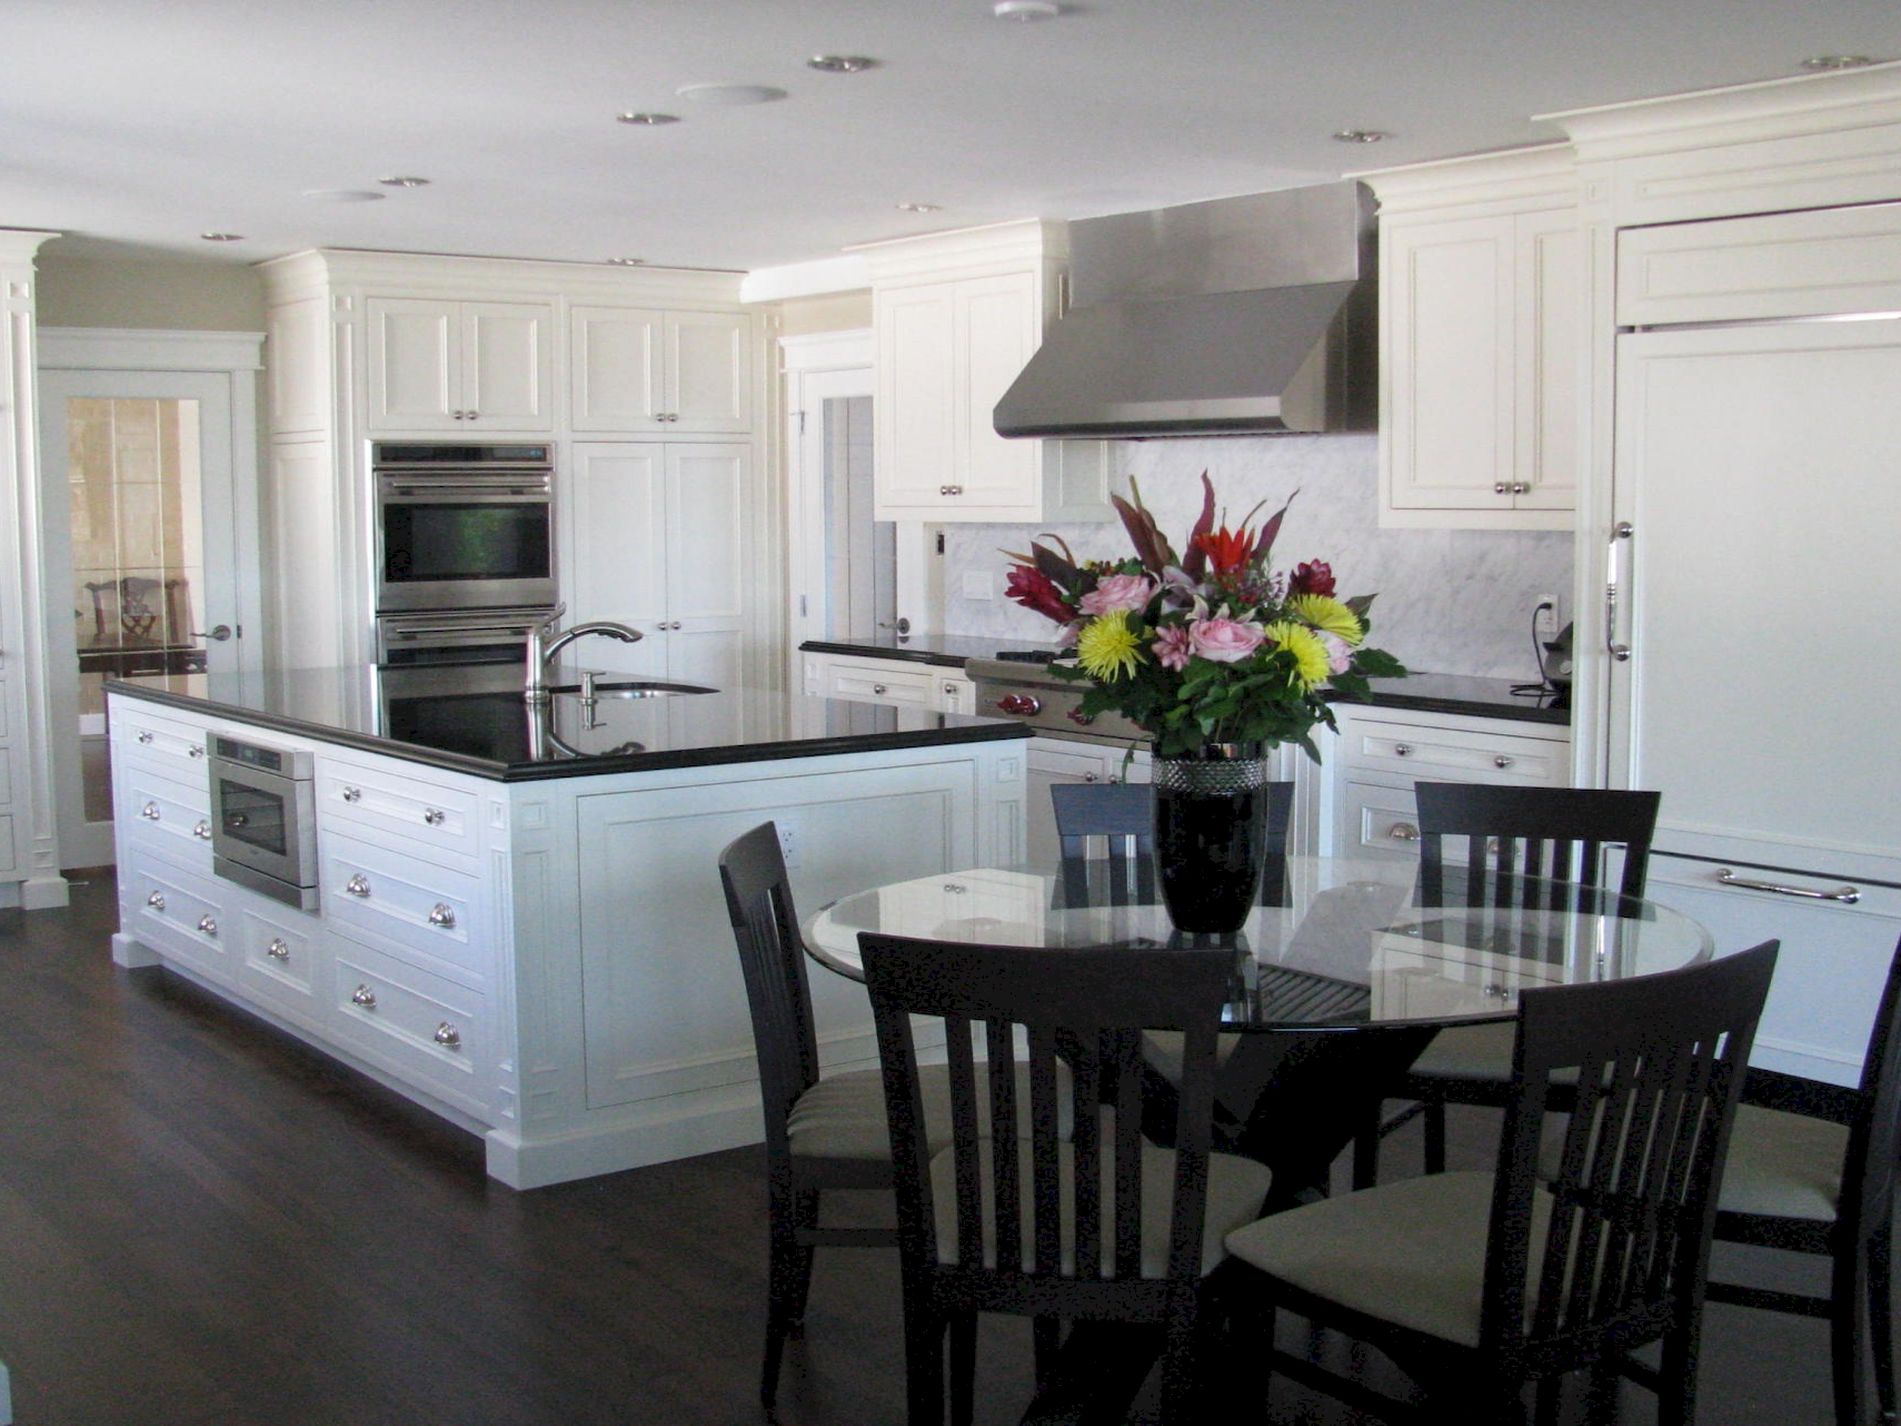 Black Kitchen Island With Seating photo - 5